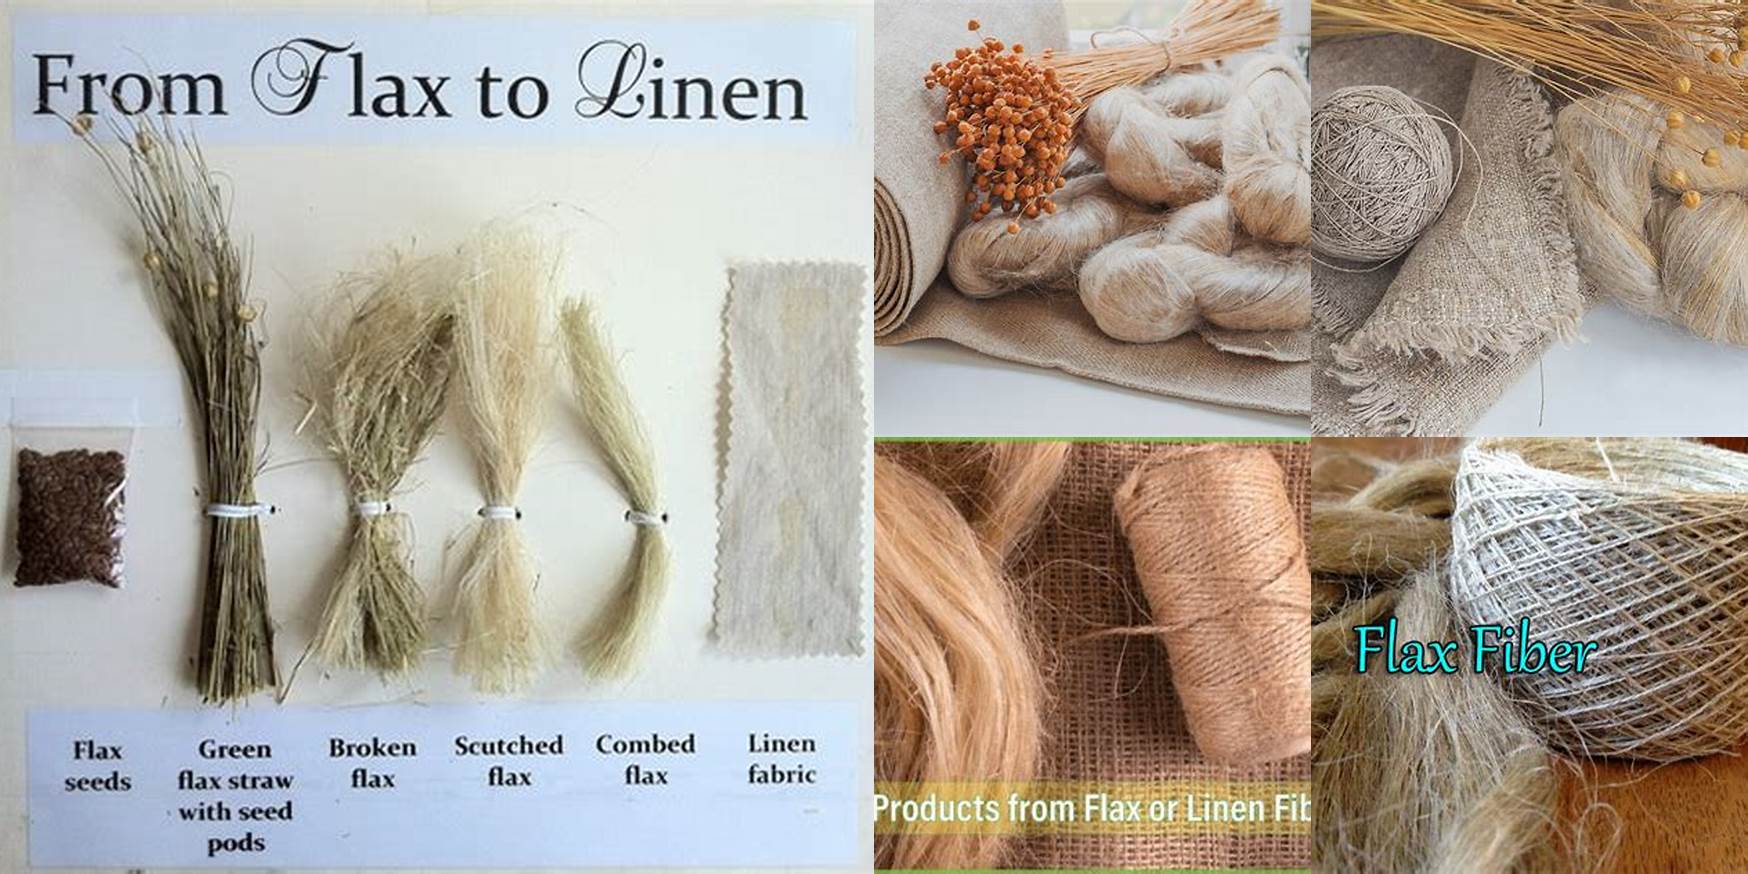 What Is Flax Used For In Clothing